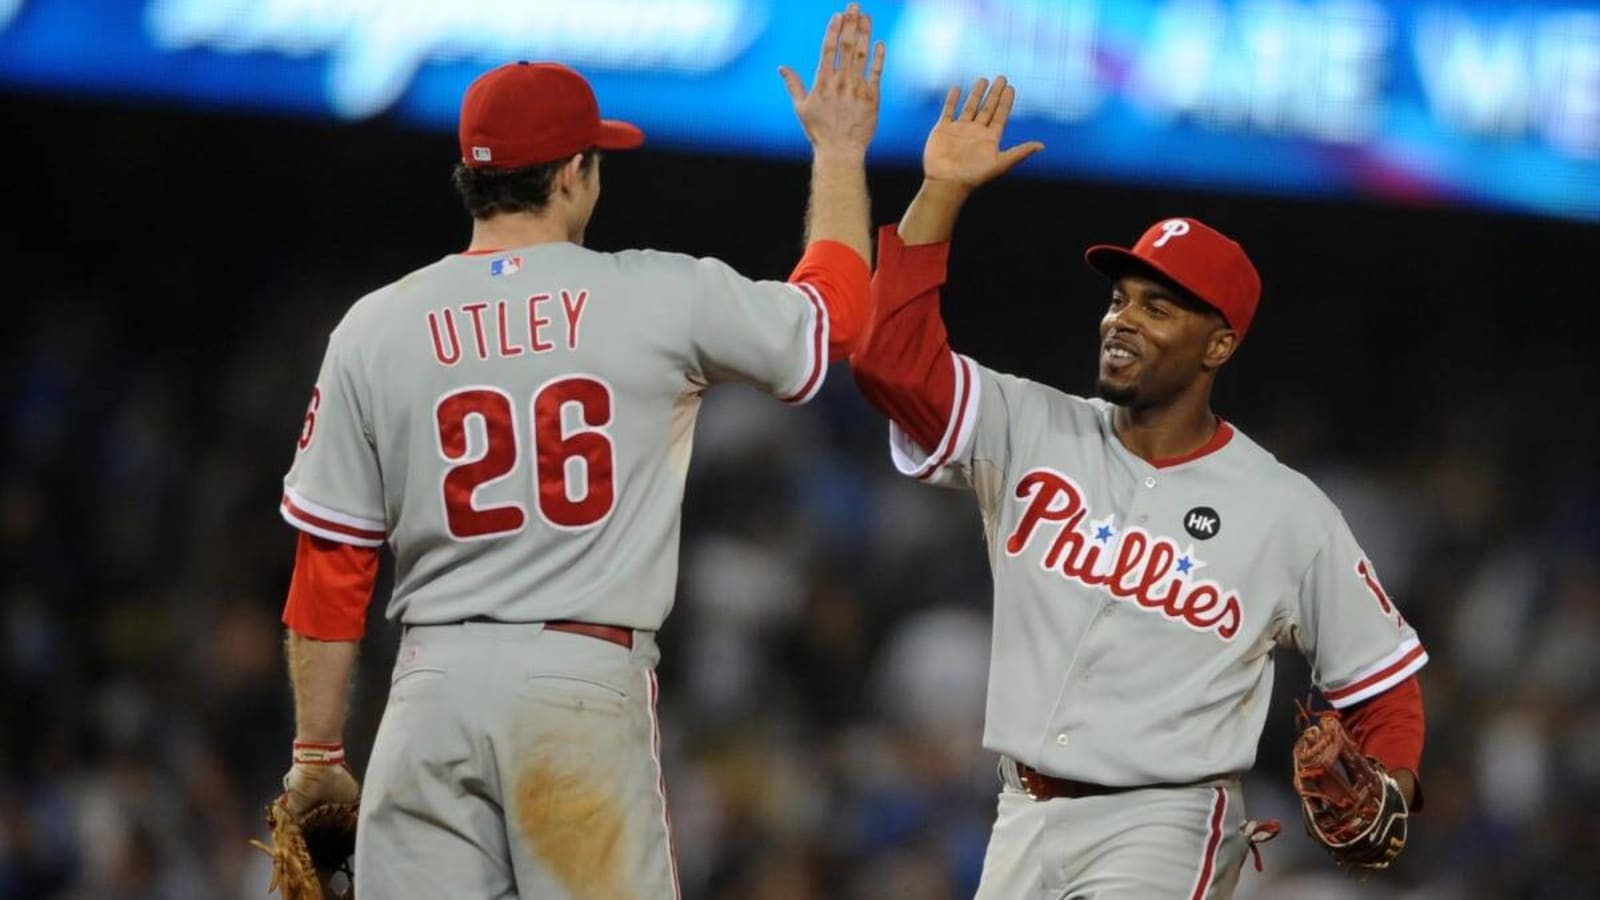 Rollins and Utley to Throw Out Game 4 First Pitch